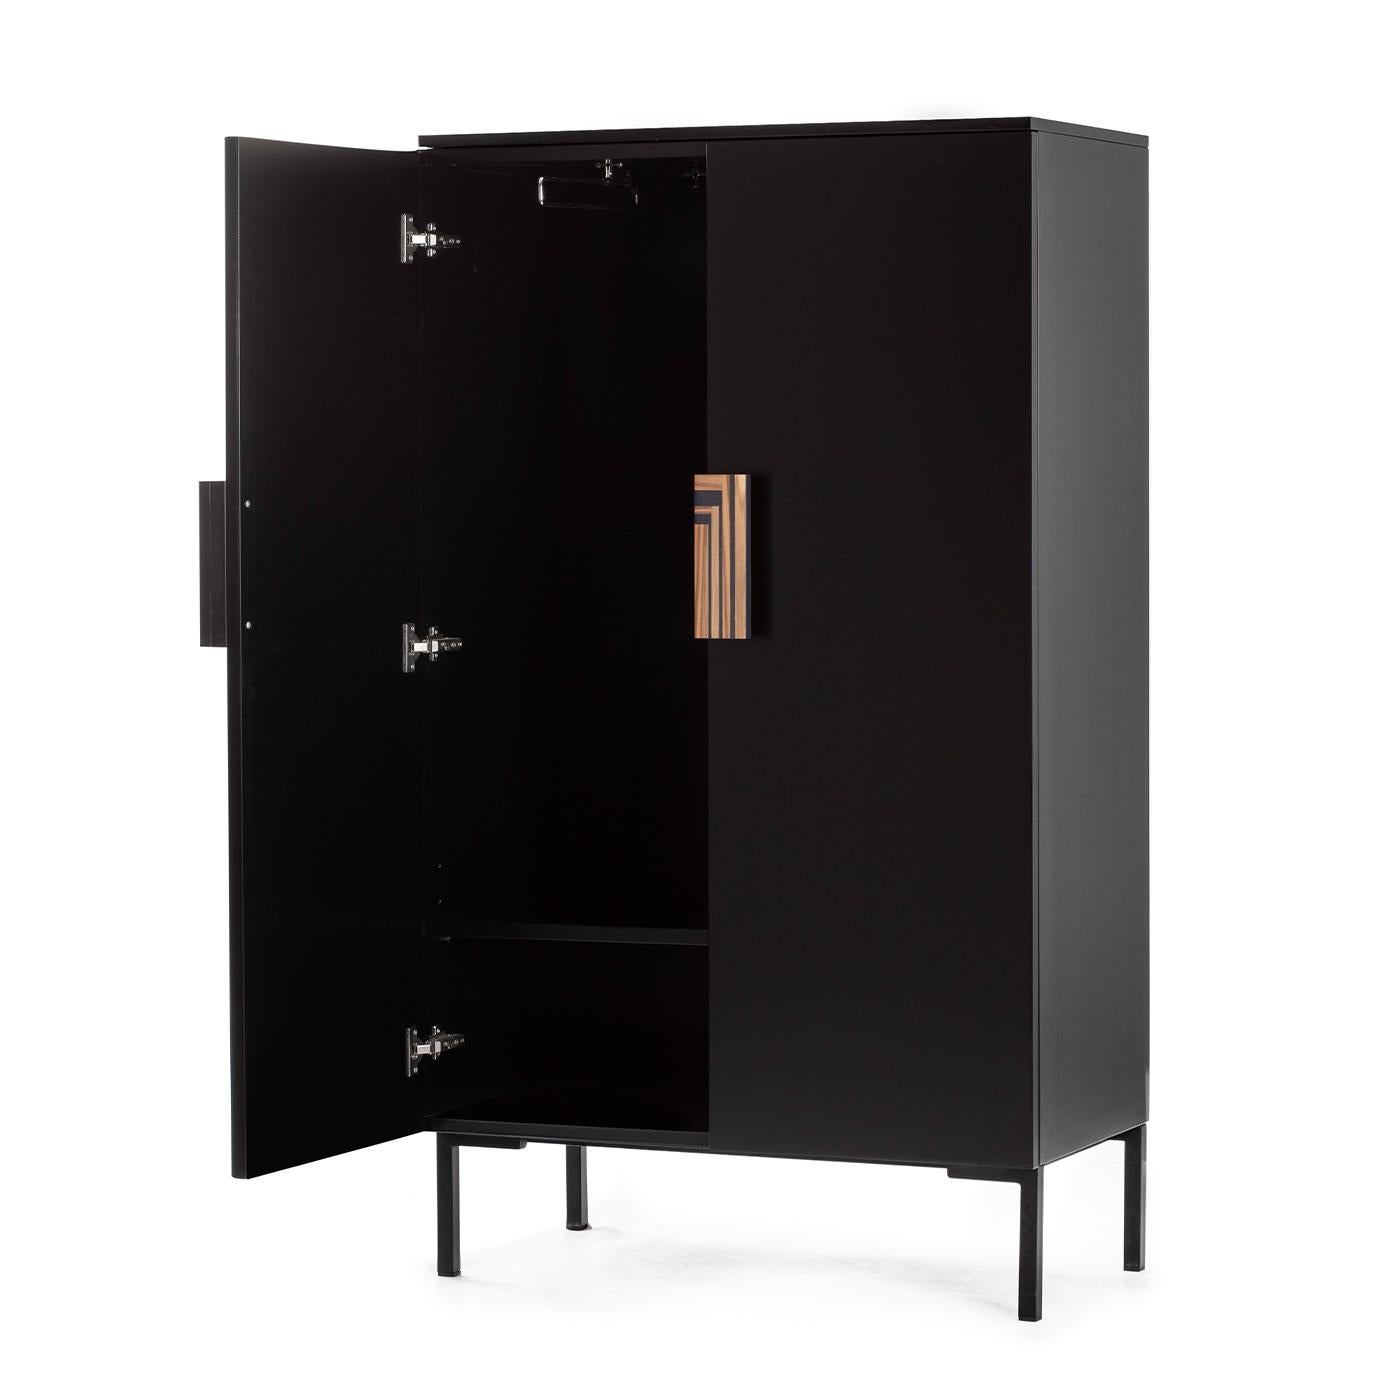 A splendid and elegant design that will imbue a refined contemporary interior with utmost sophistication, this cabinet will elevate the style of an entryway decor. Superbly handcrafted of black-lacquered wood, it features bright gold-finished